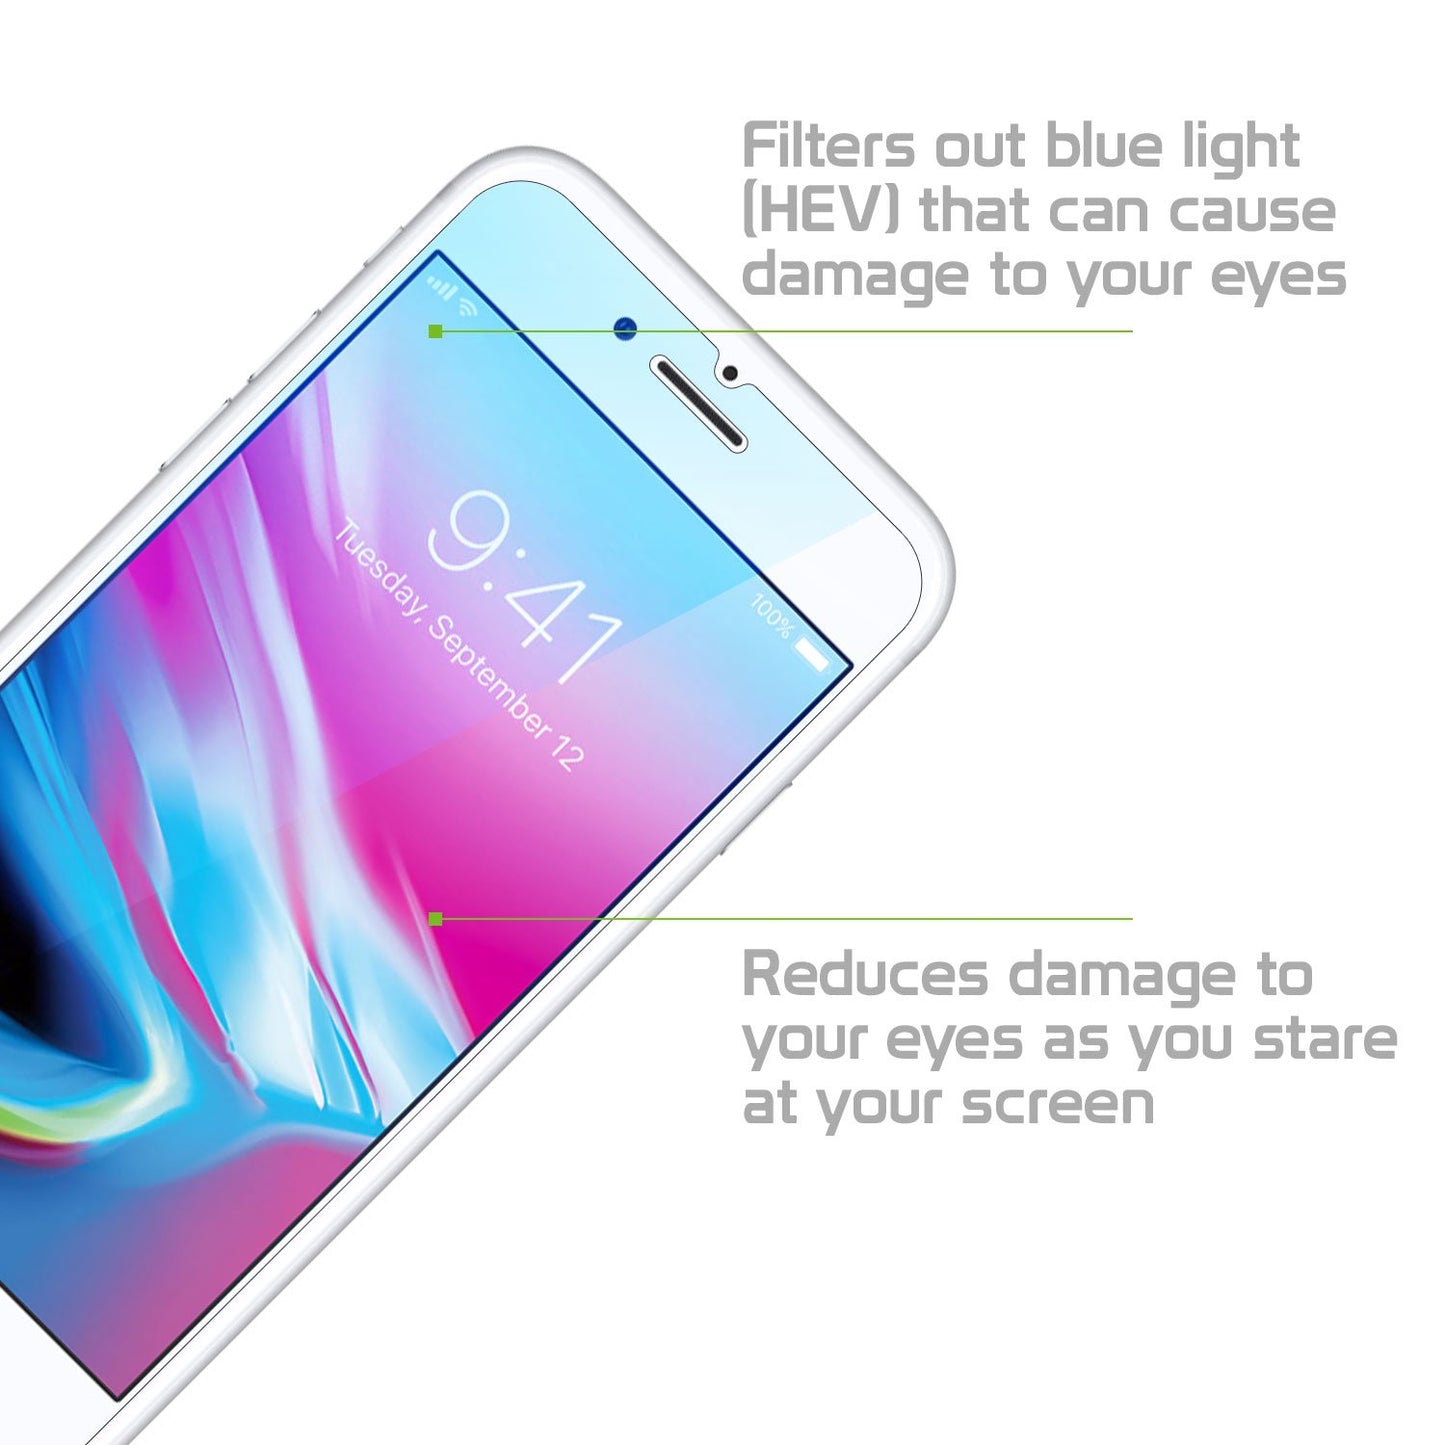 SGIPH8BL - iPhone 8 Eye Protection Screen Protector, Anti-Blue Light (HEV) Premium Tempered Glass Screen Protector for Apple iPhone 8 by Cellet